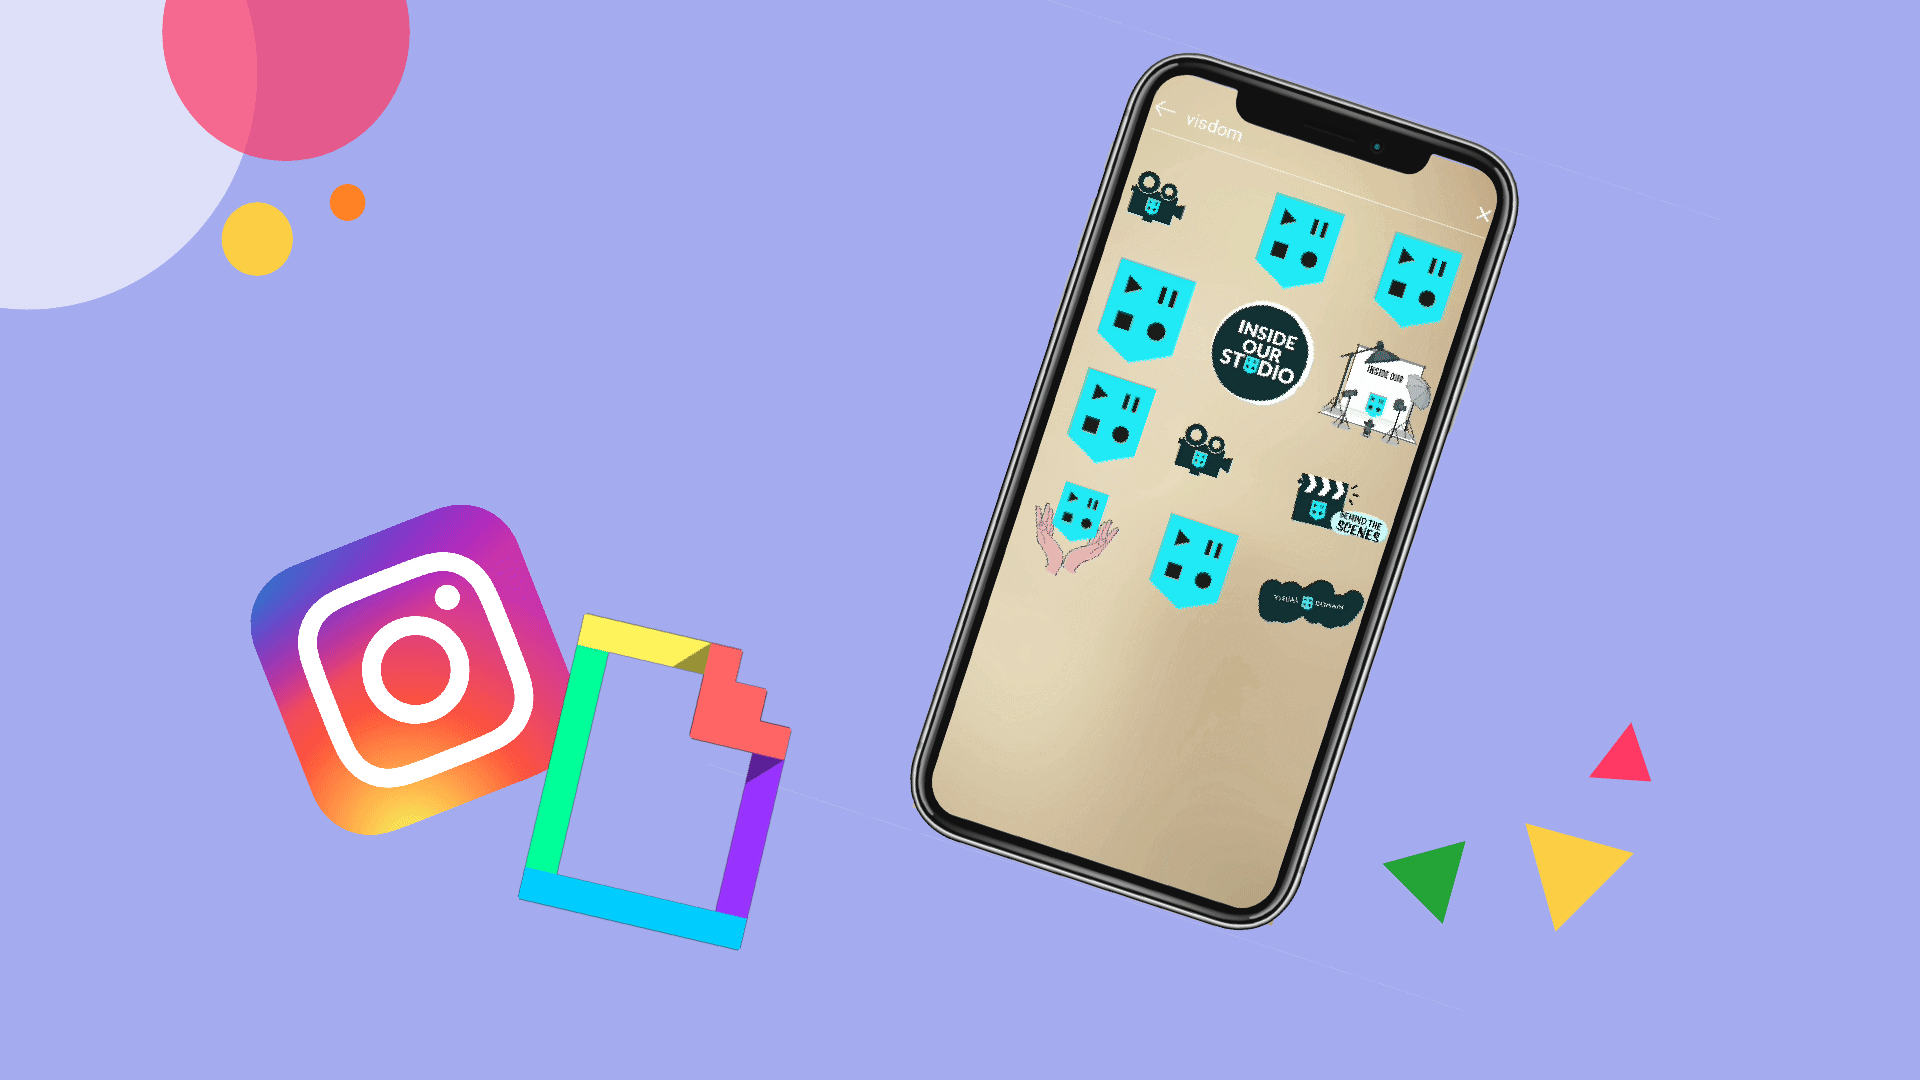 How to Make Your Own Custom GIFs for Instagram